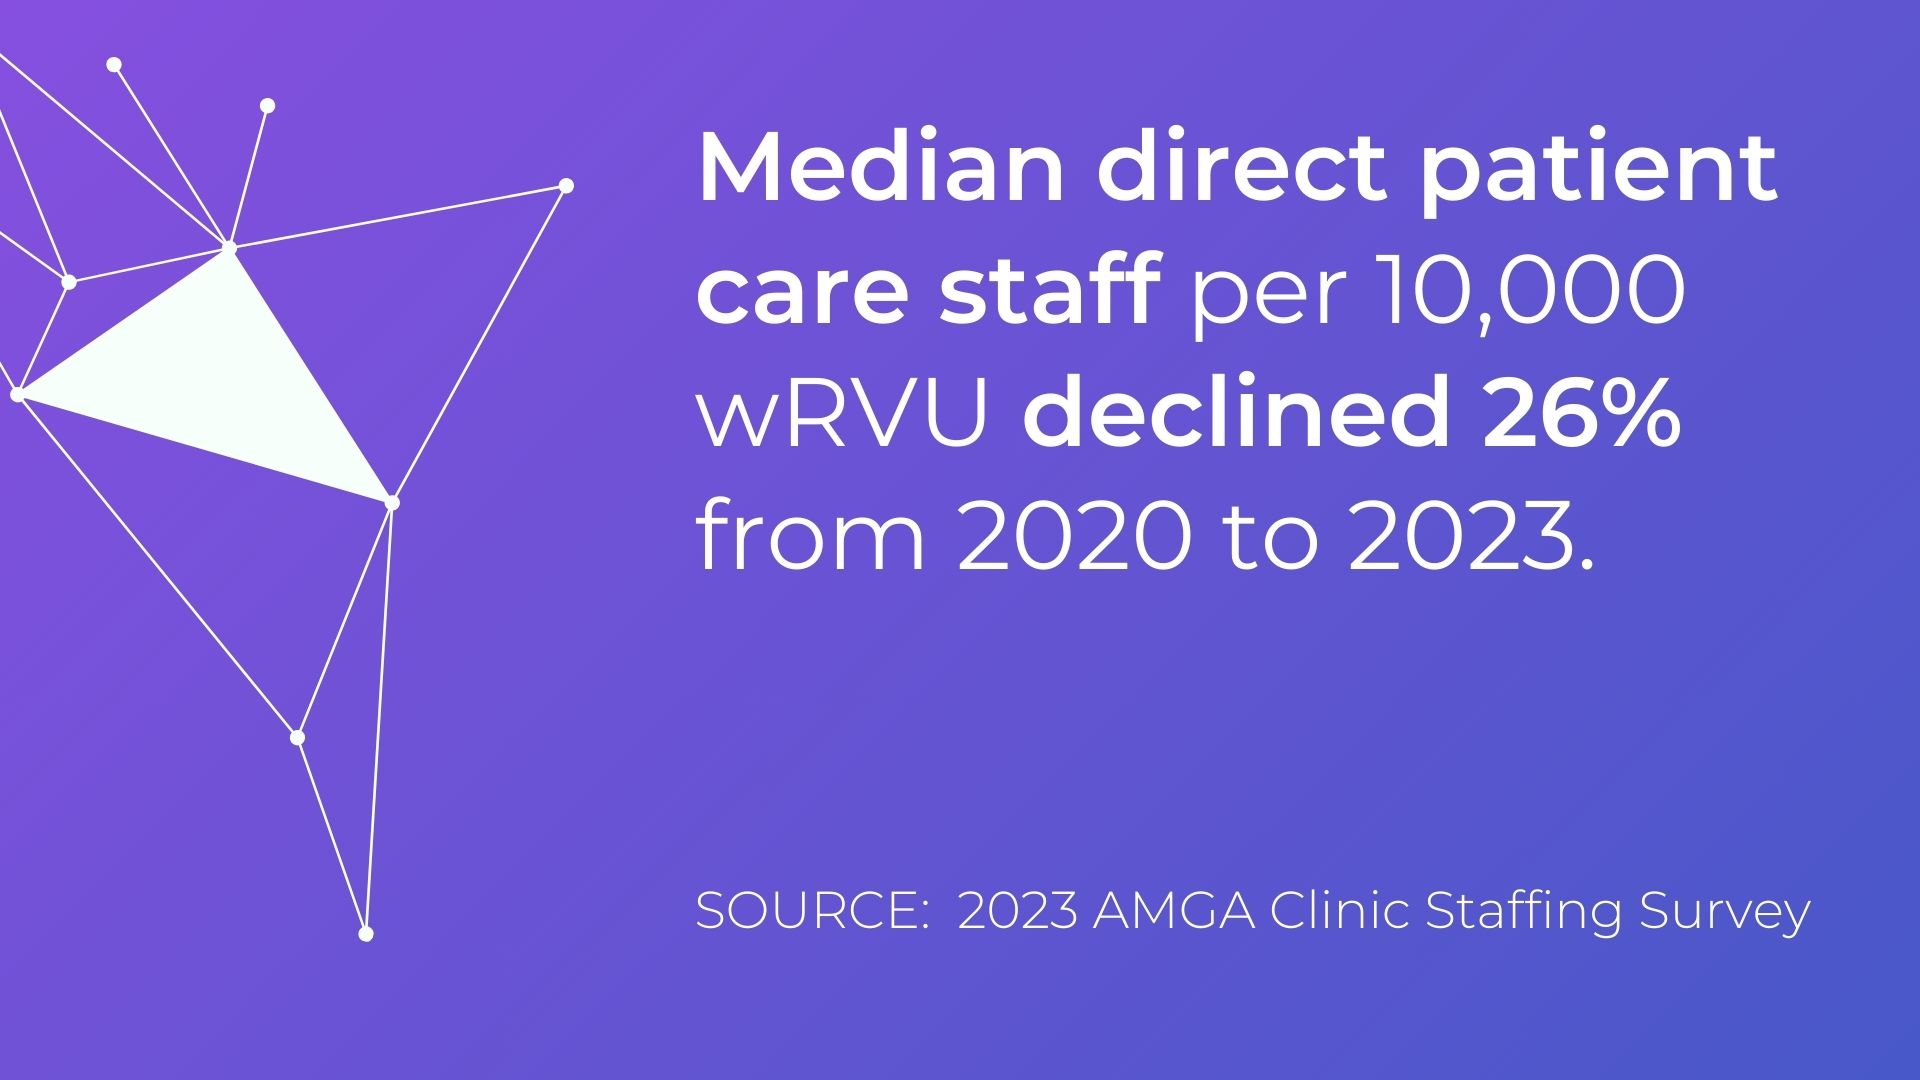 The AMGA found that median direct patient care staff per 10,000 wRVU declined 26% from 2020 to 2023